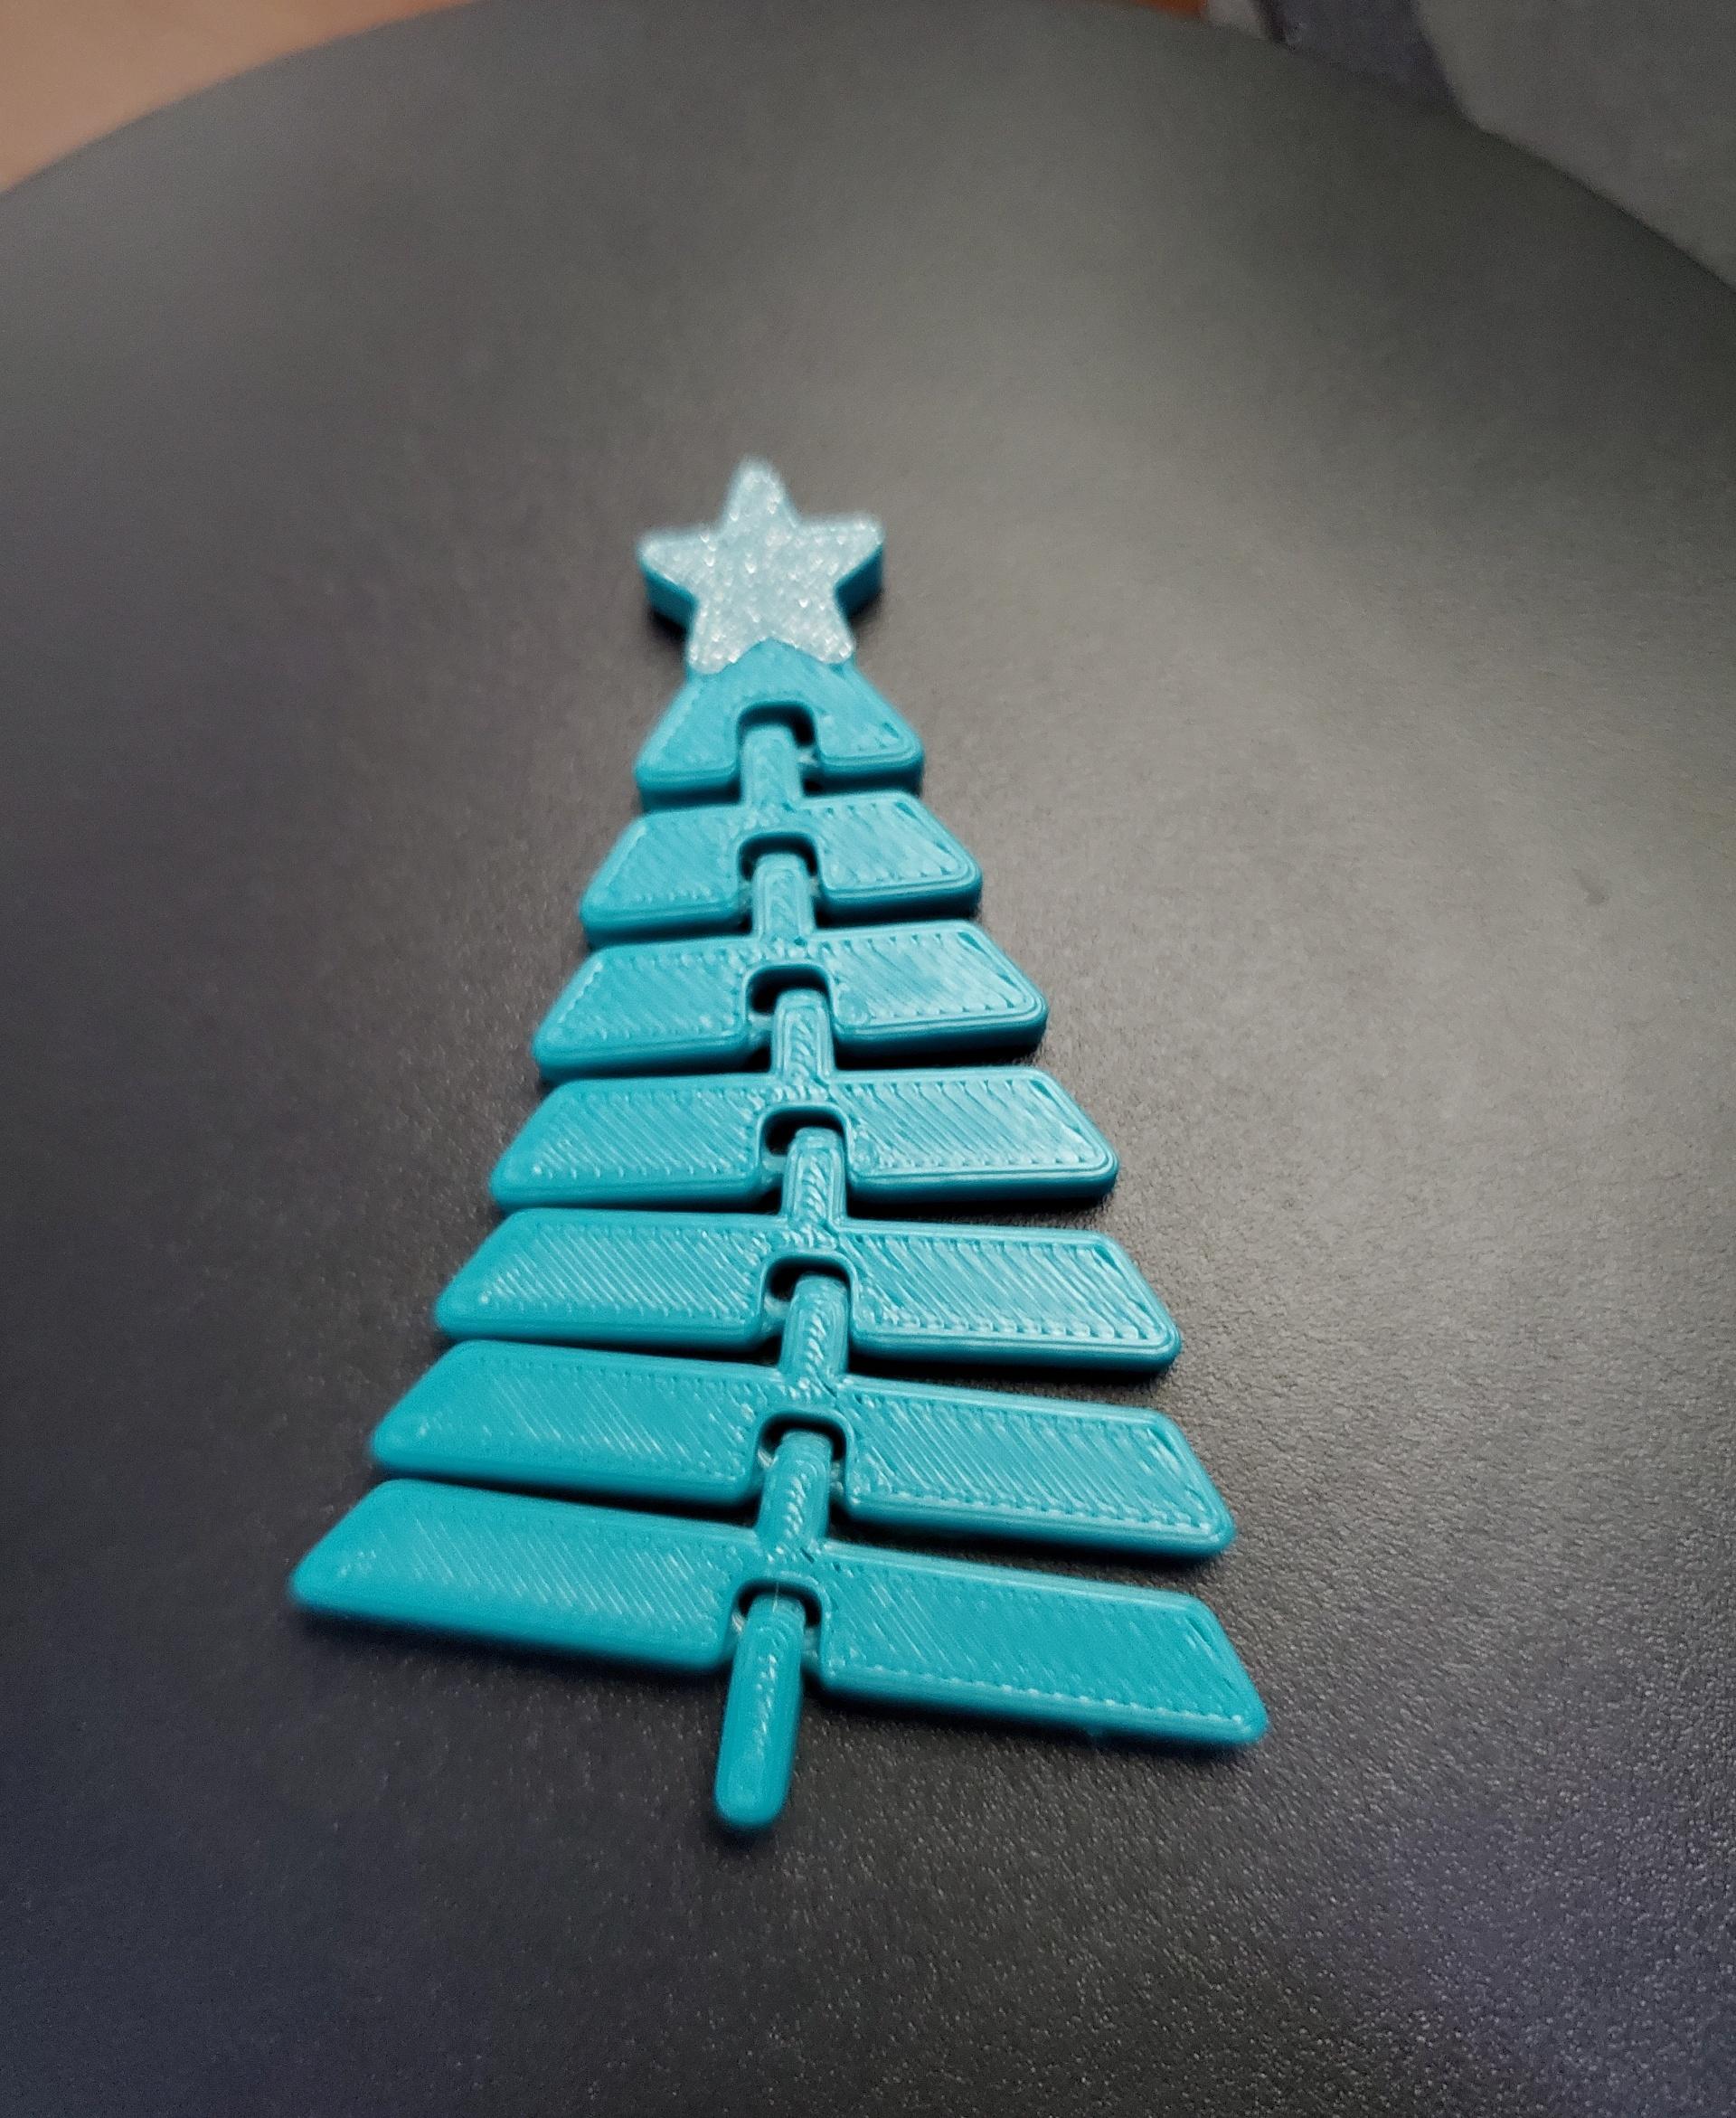 Articulated Christmas Tree with Star - Print in place fidget toy - 3mf - sliceworx ocean cyan - 3d model